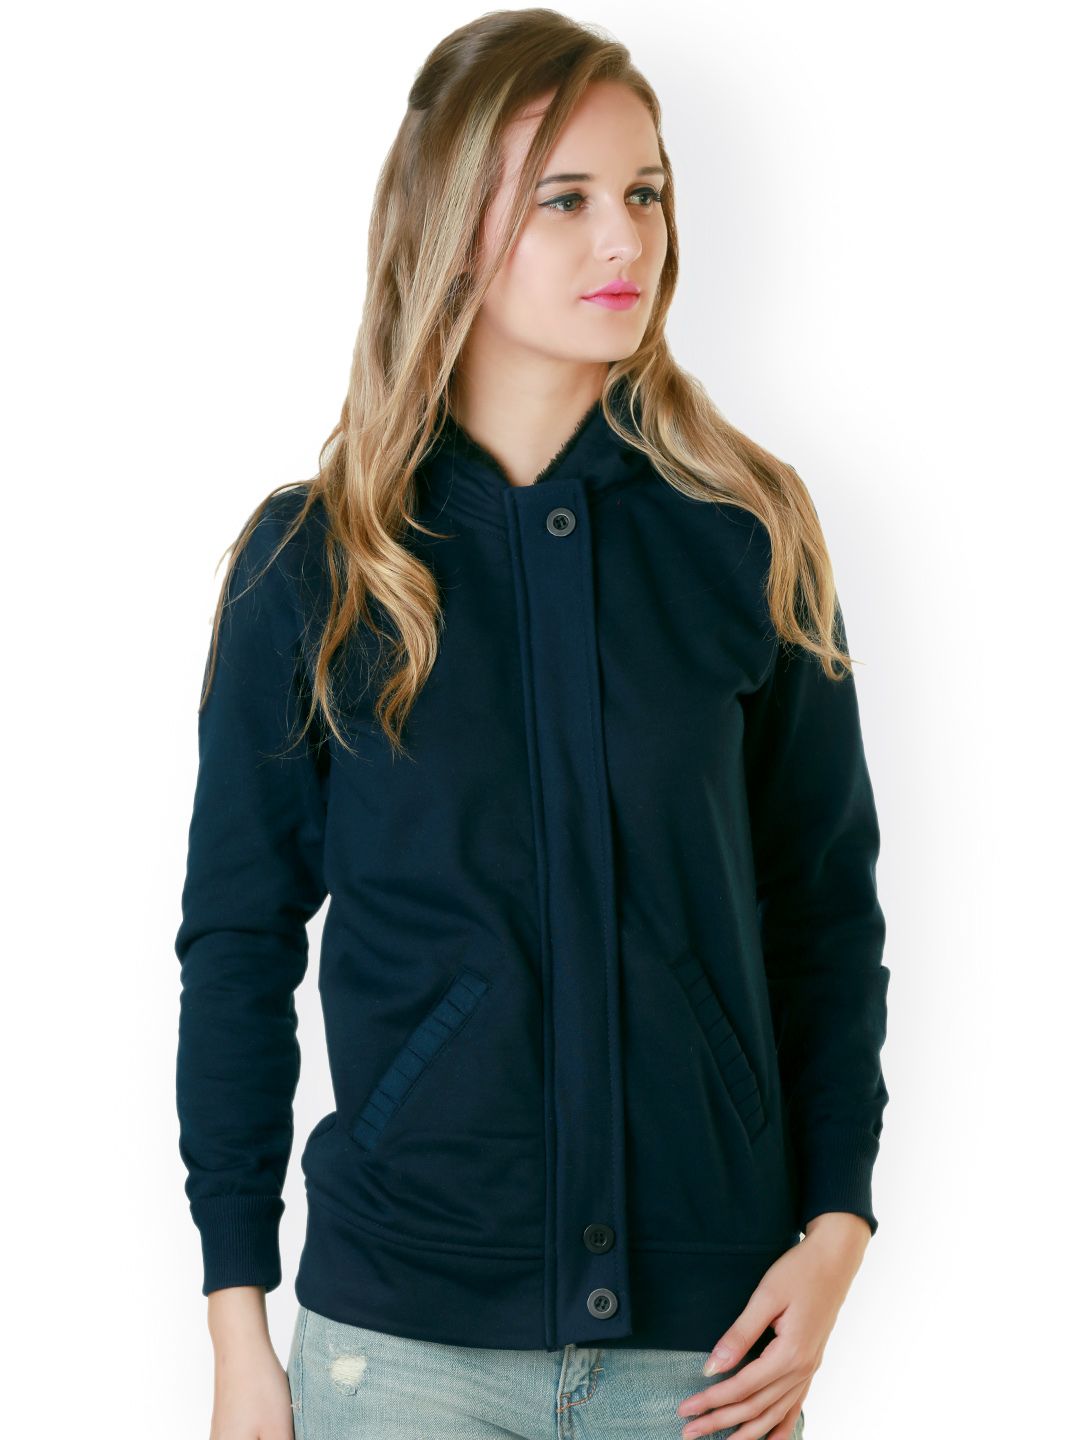 Belle Fille Navy Blue Hooded Jacket Price in India